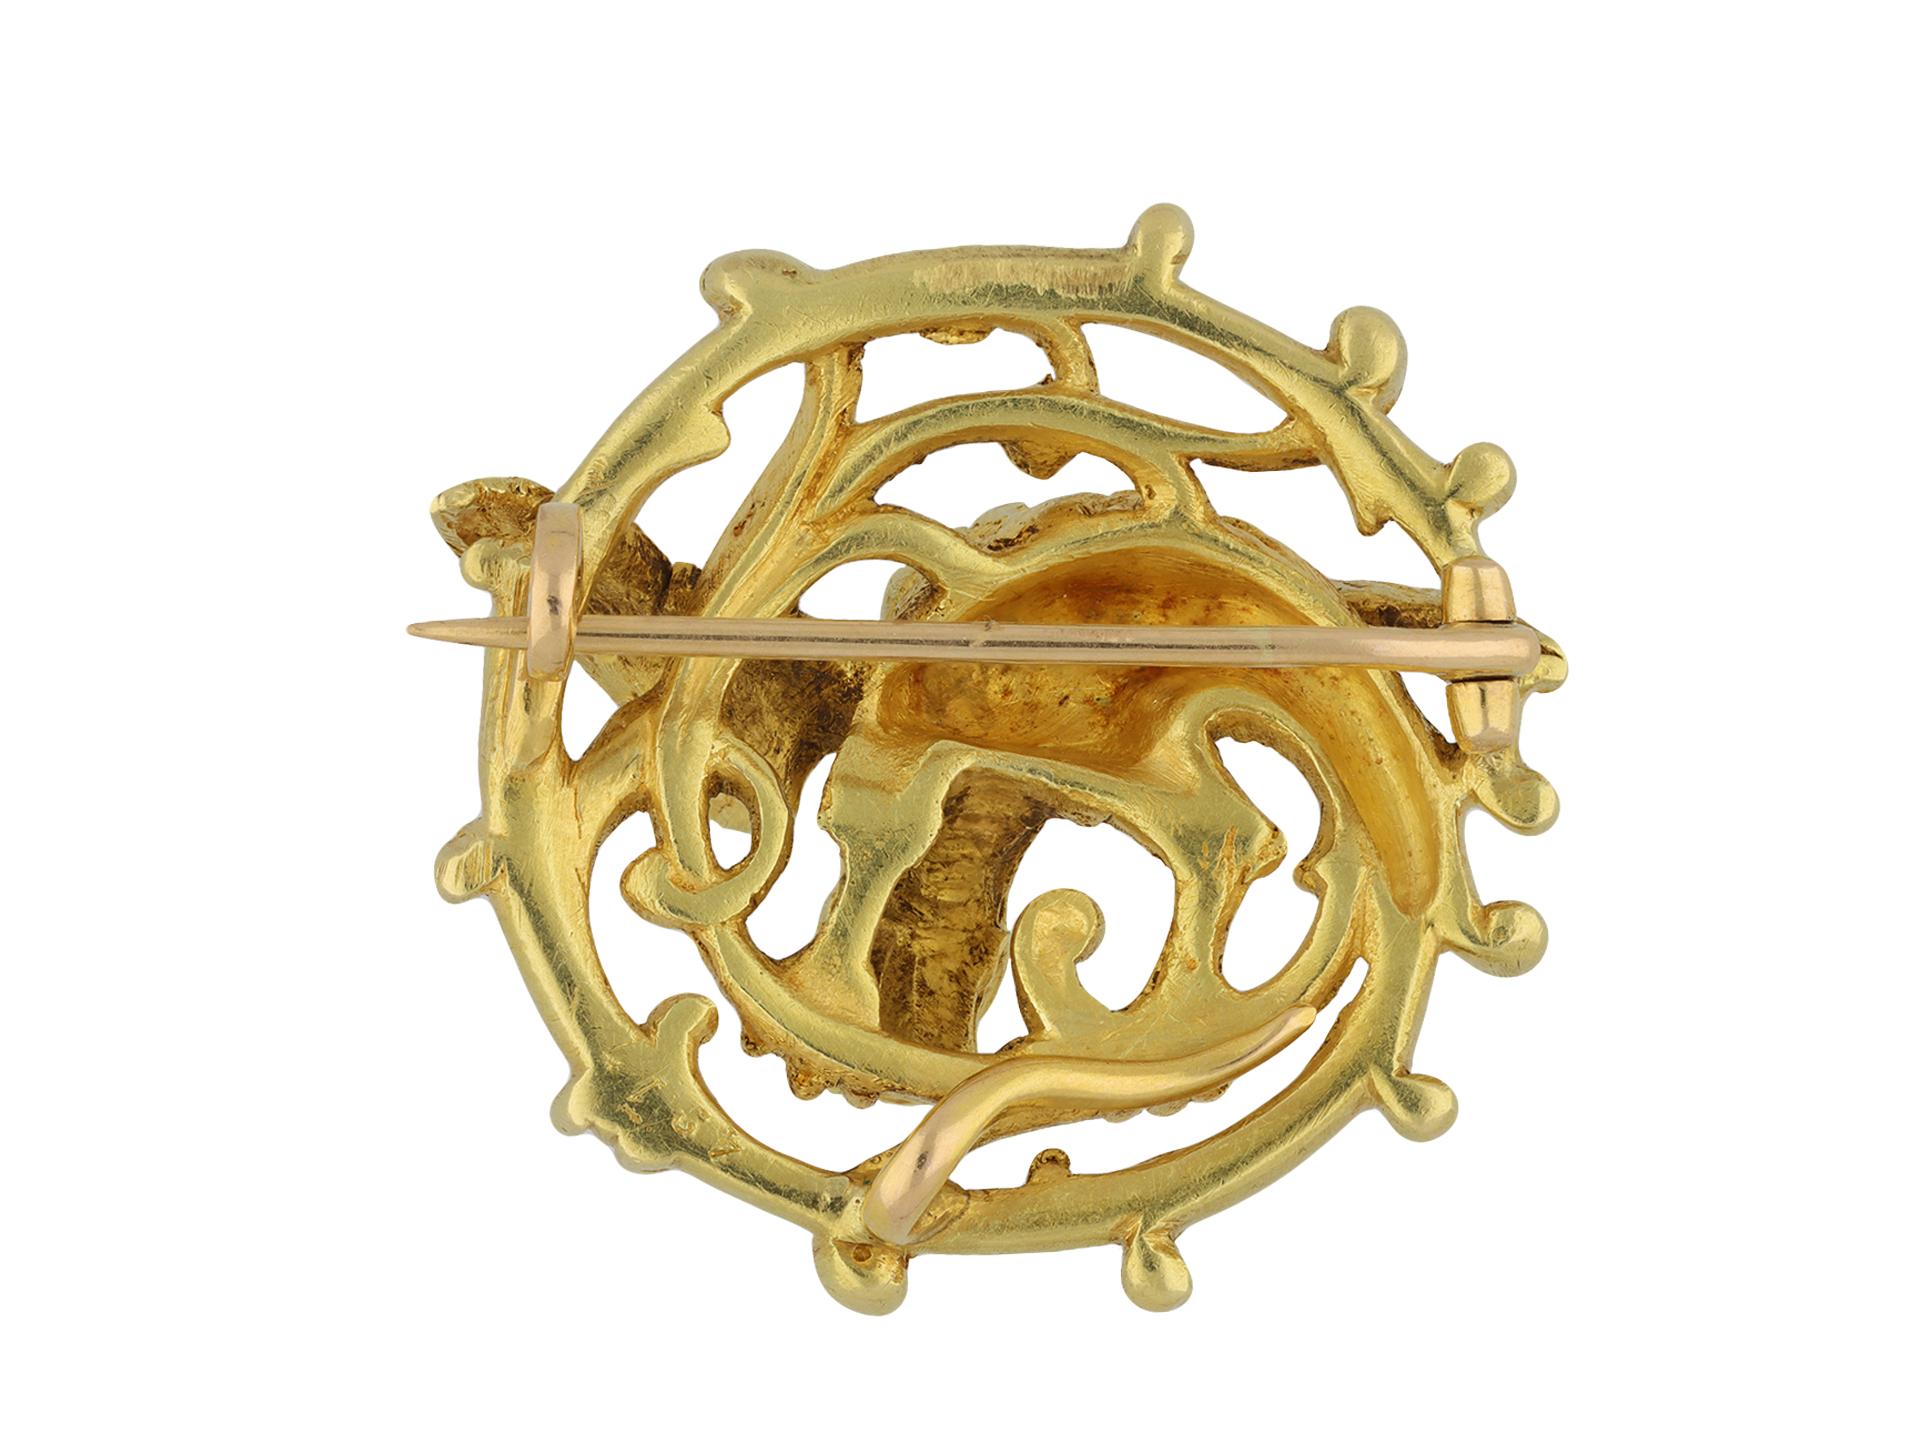 Maison Plisson Et Hartz Chimera Brooch, French, circa 1900 In Good Condition For Sale In London, GB